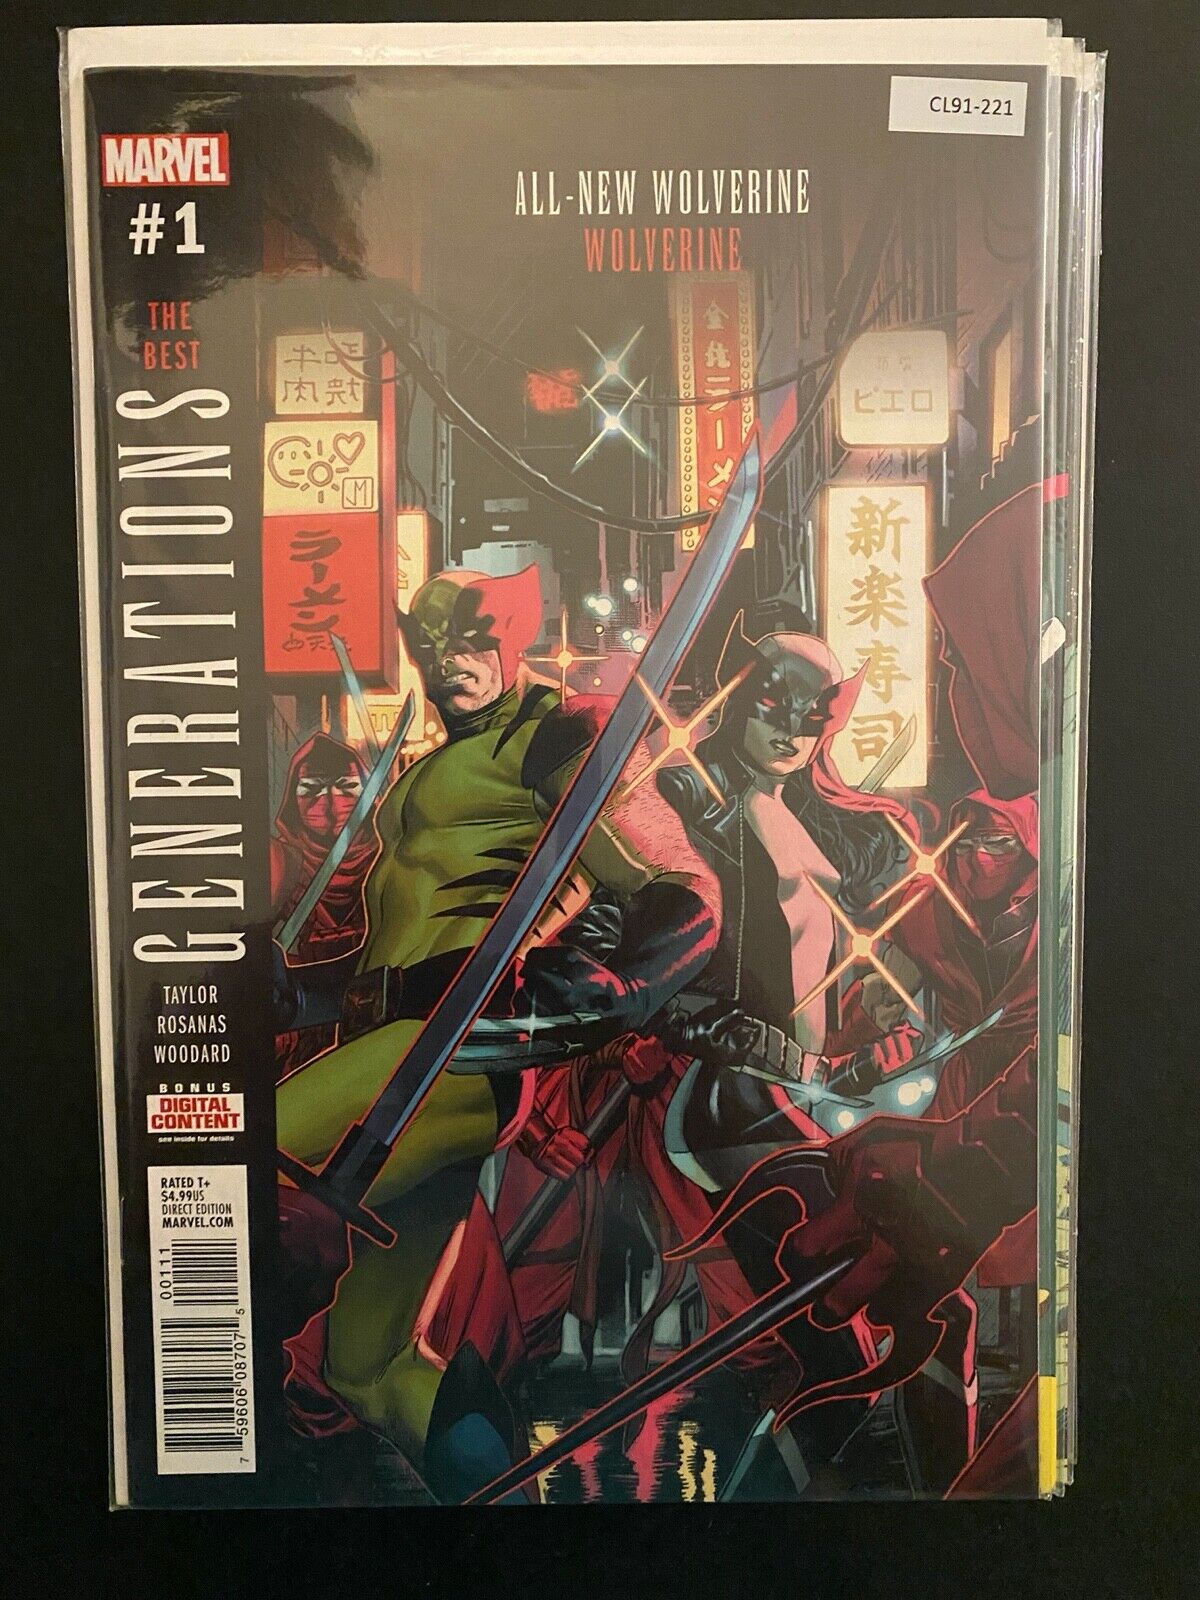 Generations: Wolverine & All-New Wolverine #1 2017 9.2 Marvel Comic CL91-221